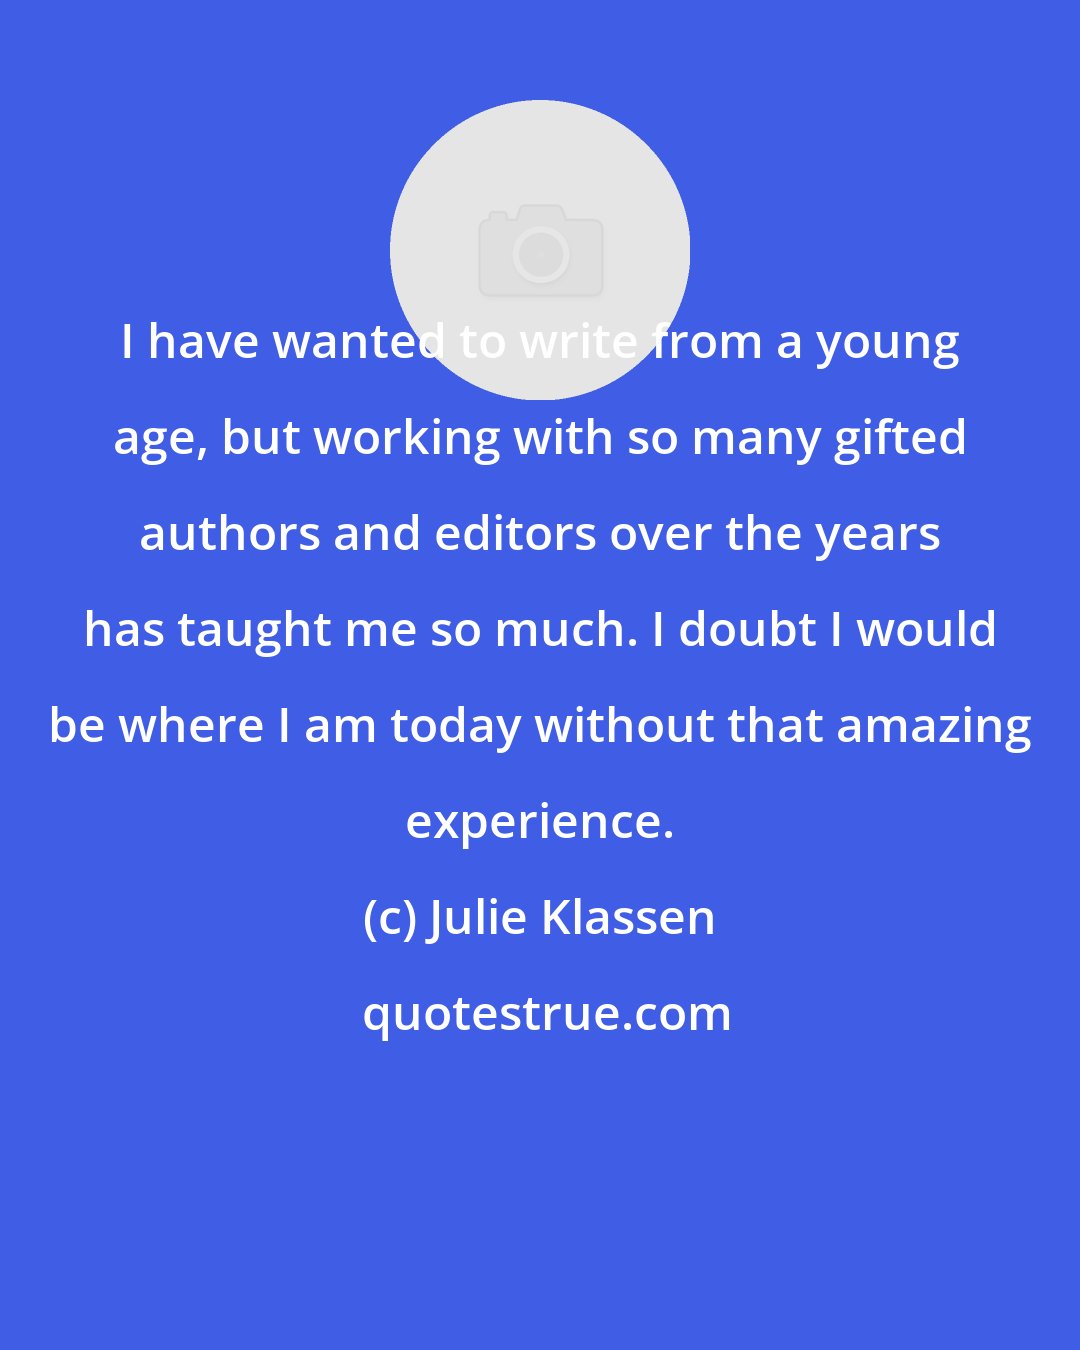 Julie Klassen: I have wanted to write from a young age, but working with so many gifted authors and editors over the years has taught me so much. I doubt I would be where I am today without that amazing experience.